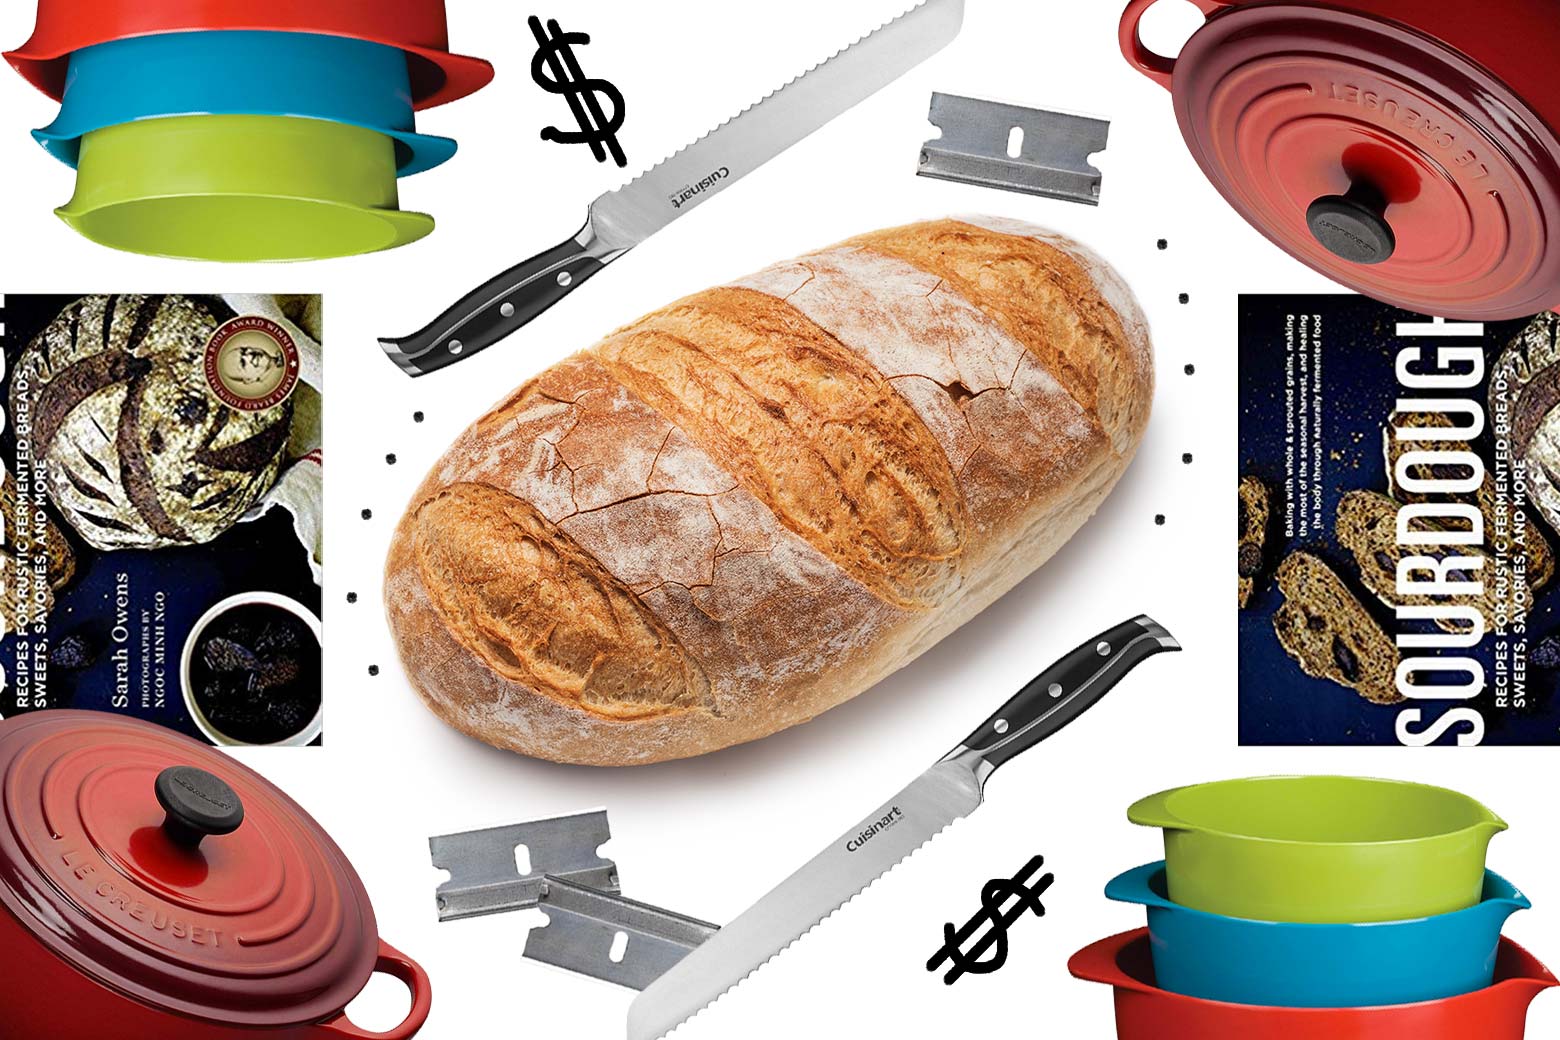 Collage of bread-baking tools, with a finished loaf of bread in the center.